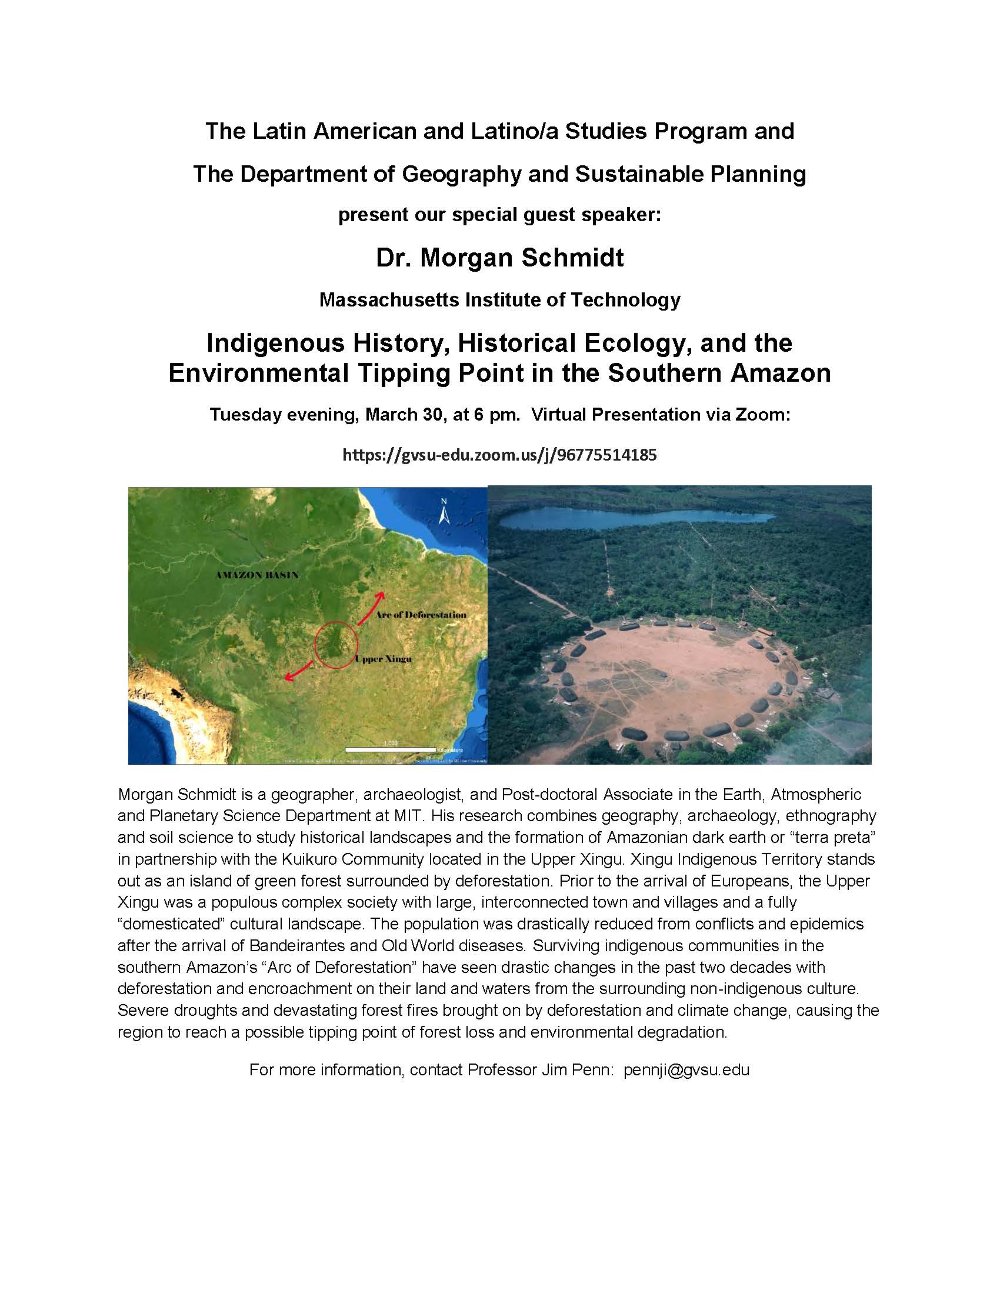 A flier for the Indigenous History, Historical Ecology, and the Environmental Tipping Point in the Southern Amazon event